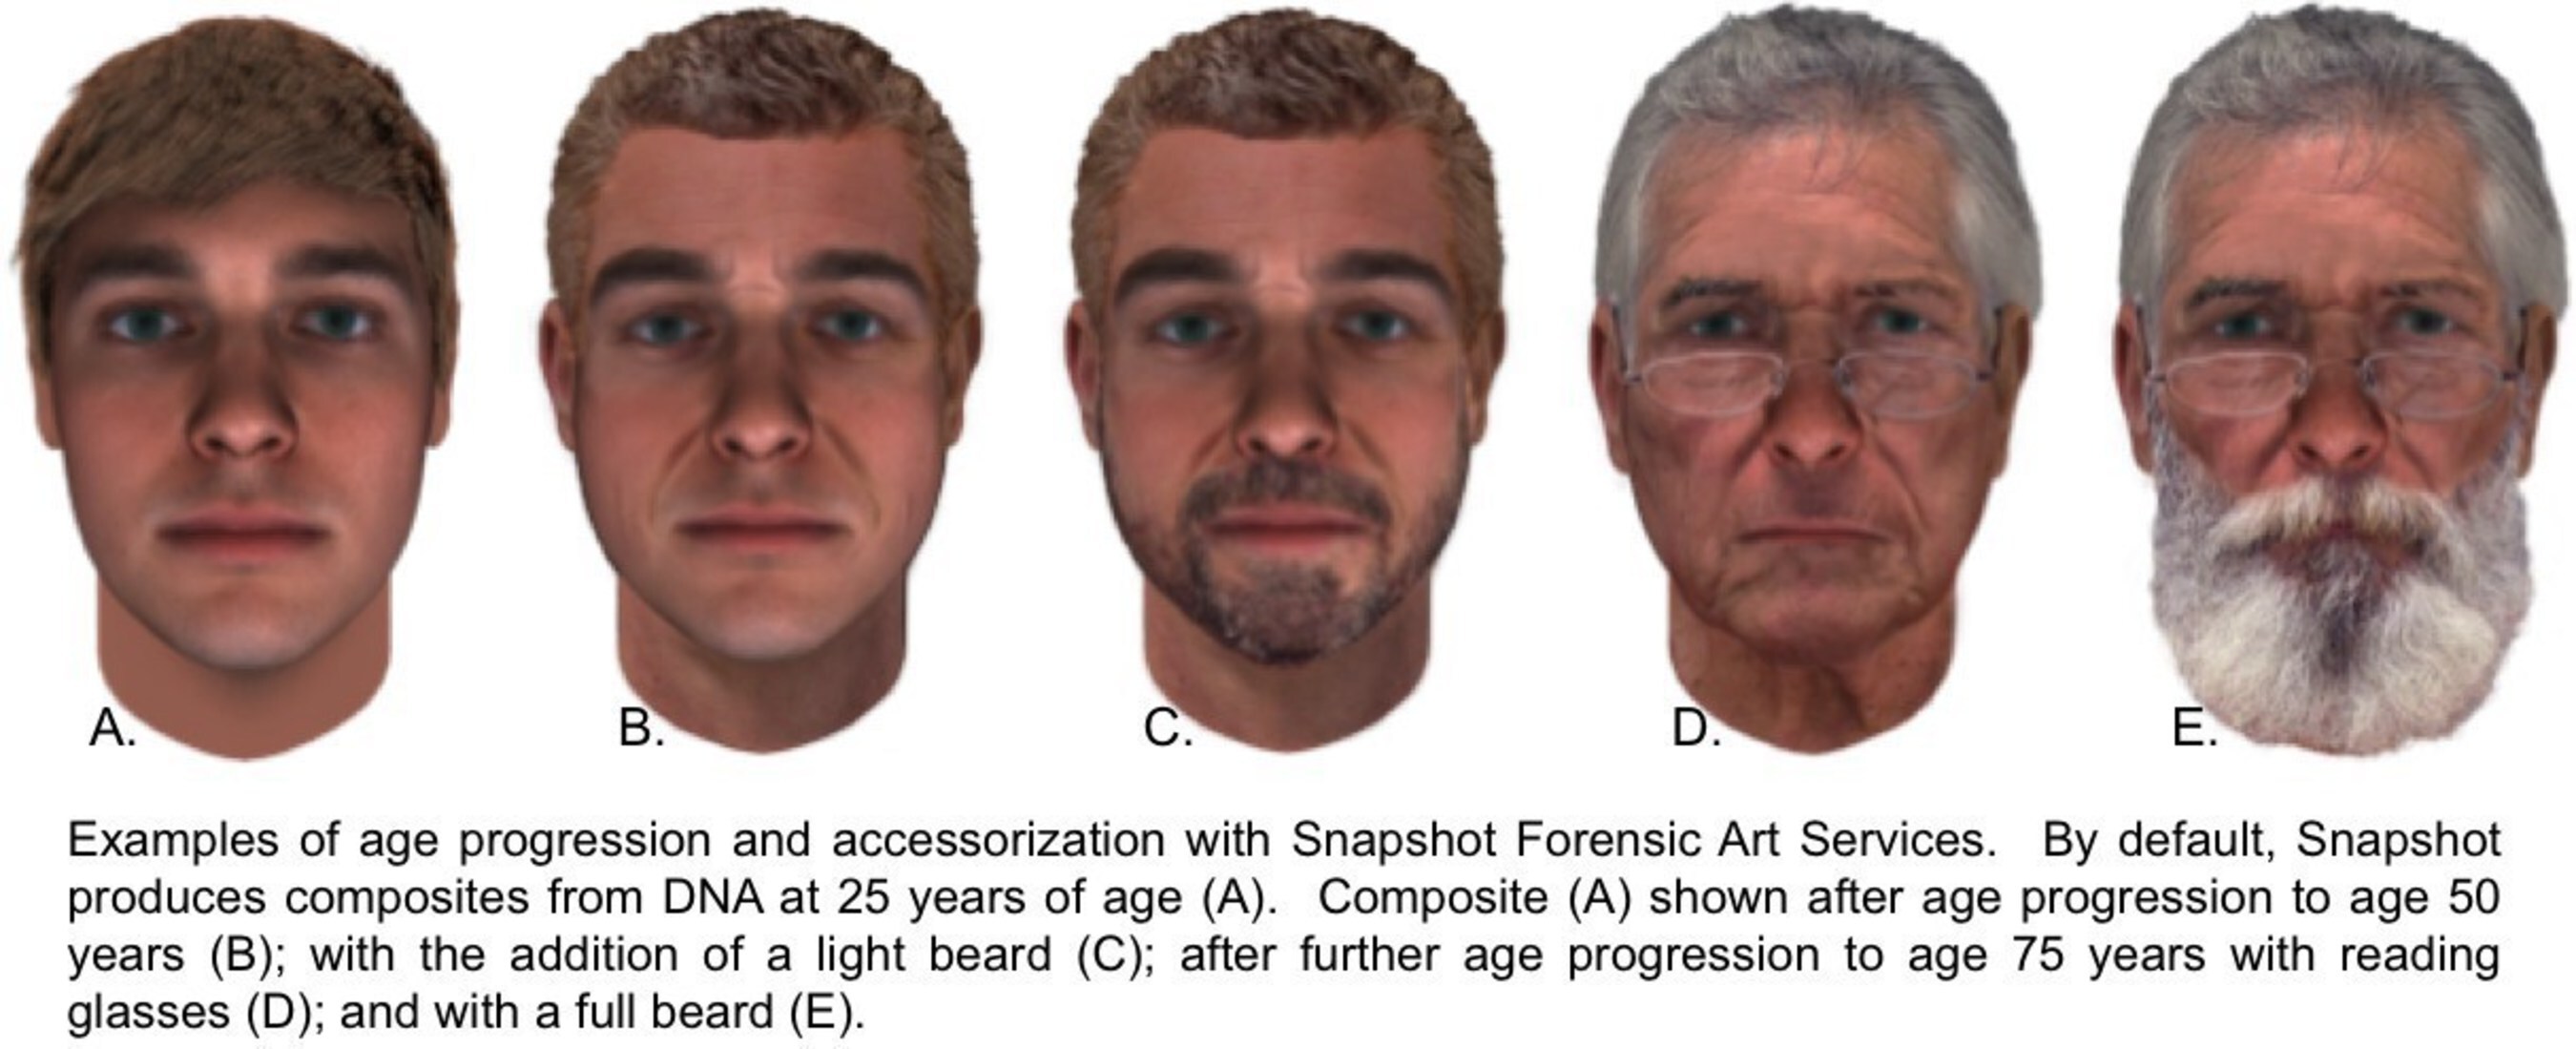 [IMAGE] Parabon Announces New Snapshot Forensic Art Service at the ...